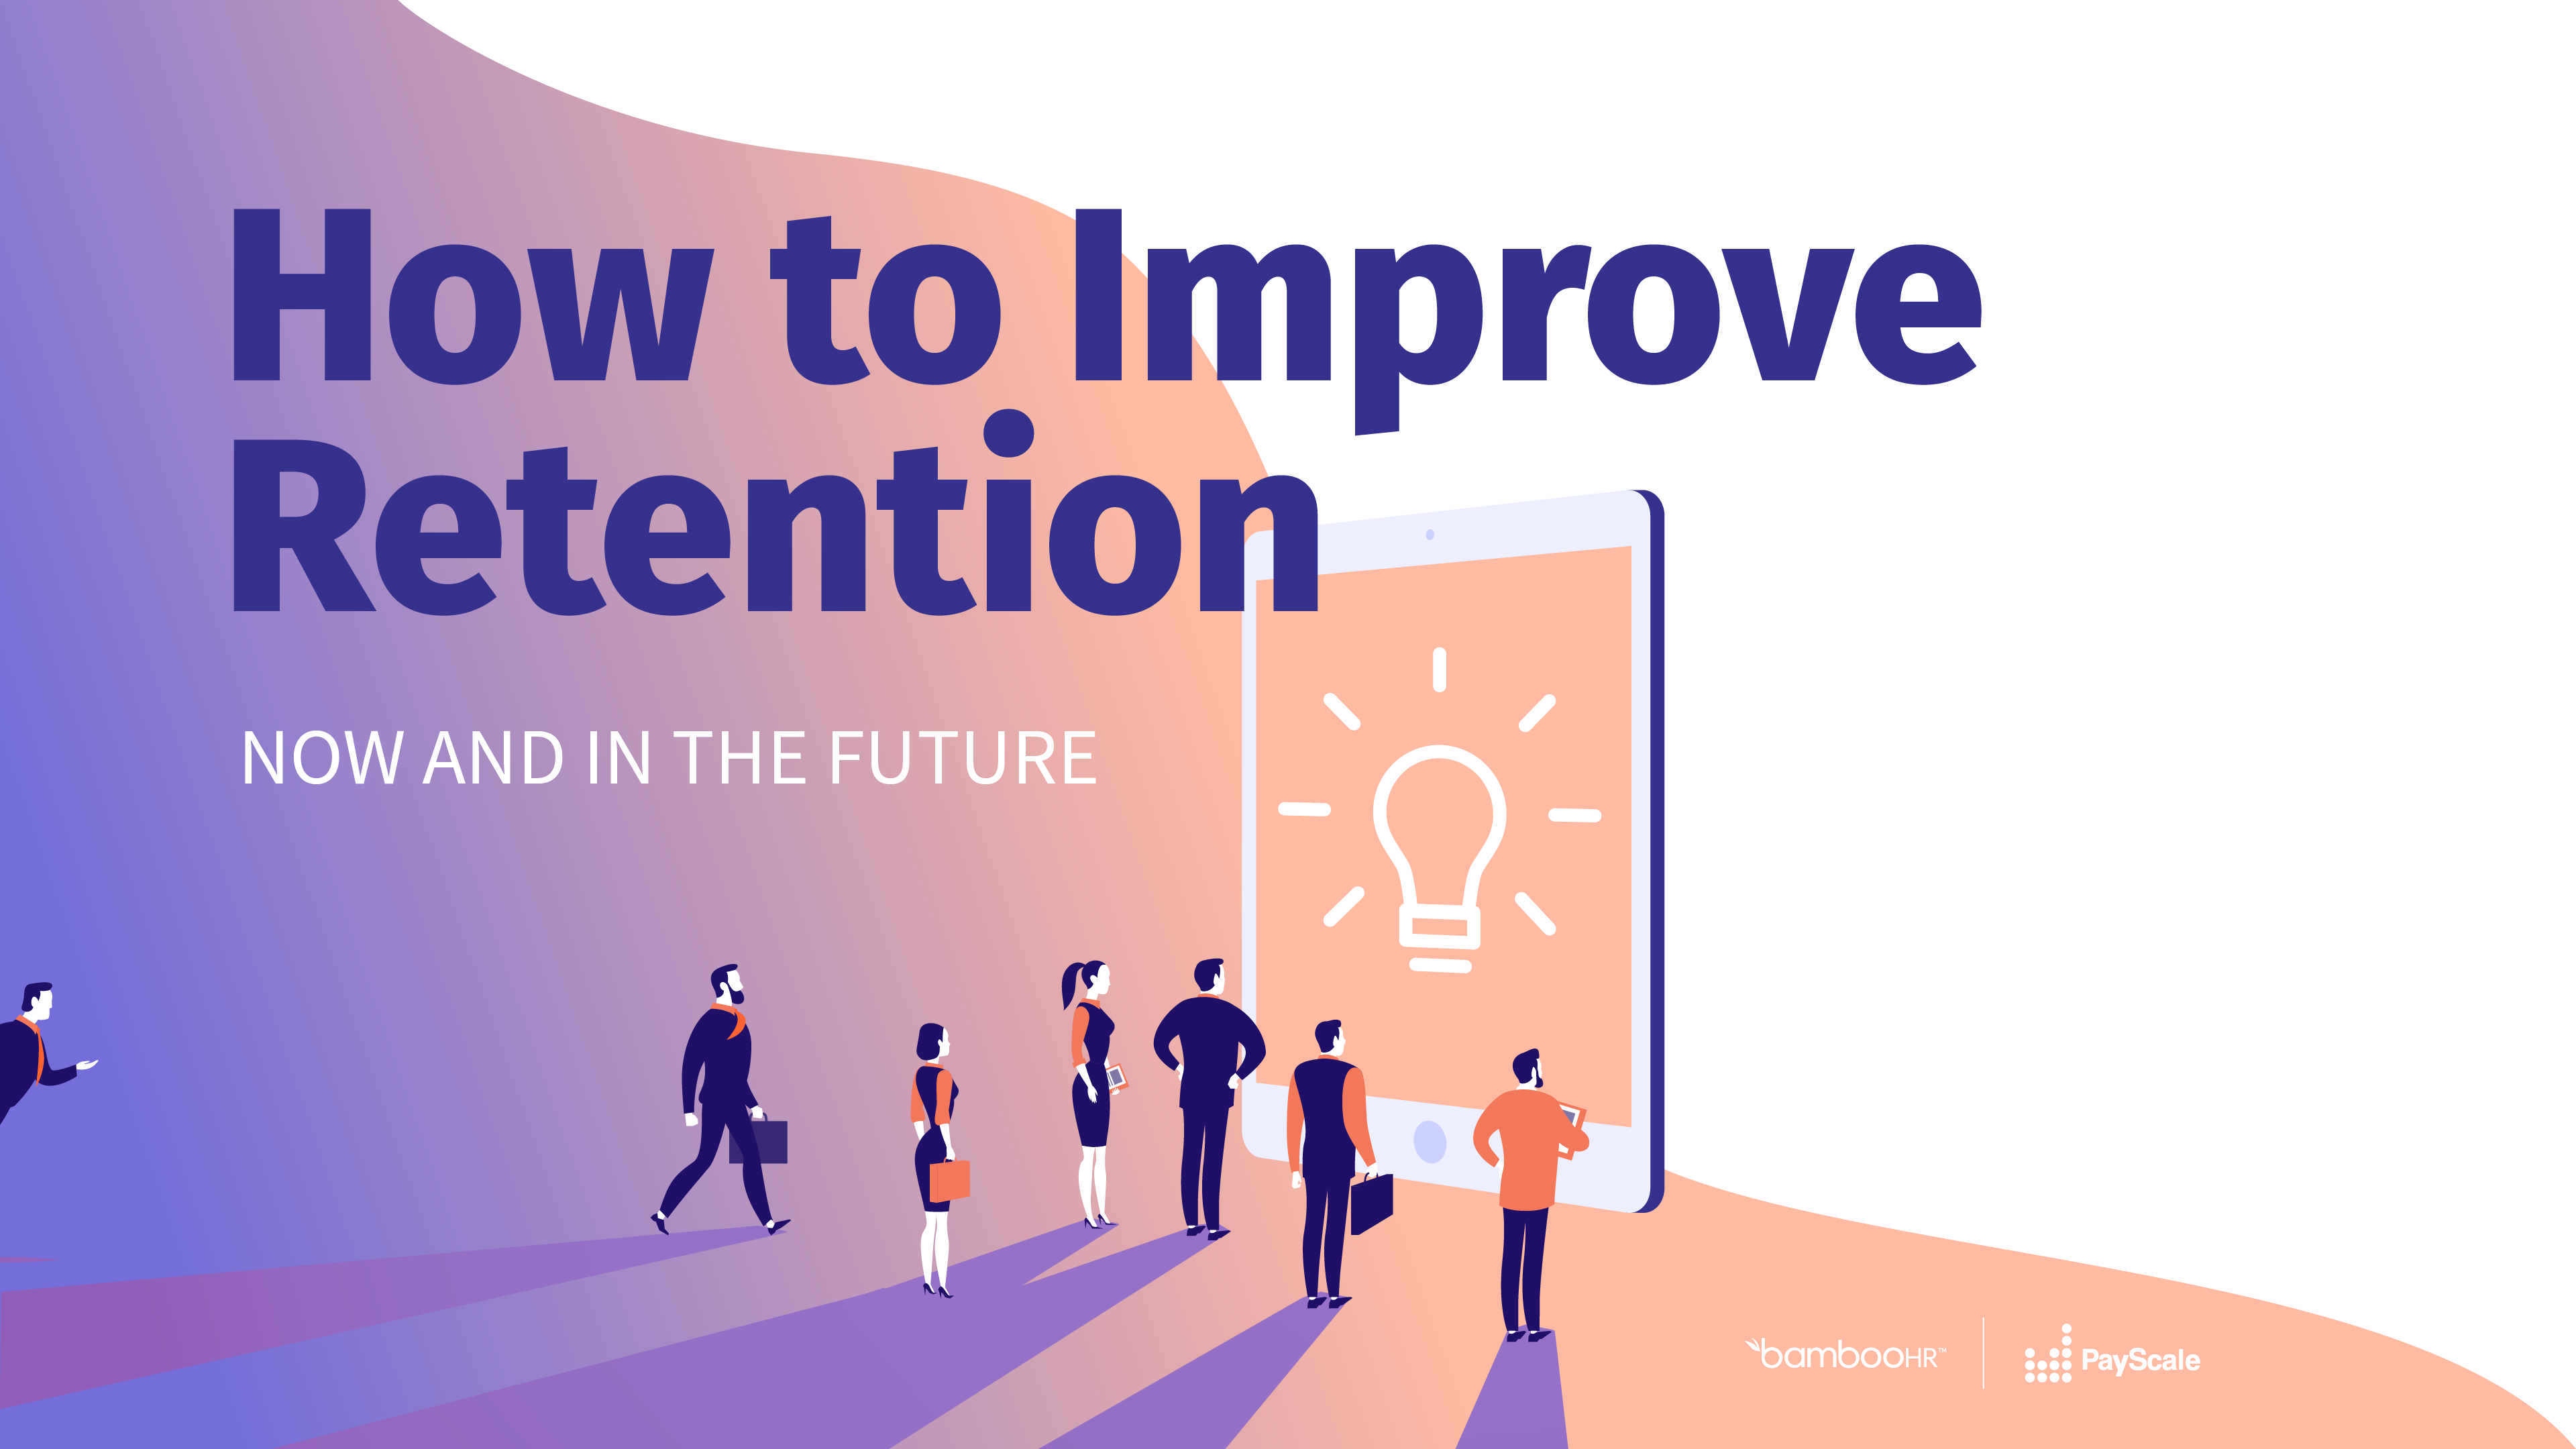 How to Improve Retention Now and in the Future